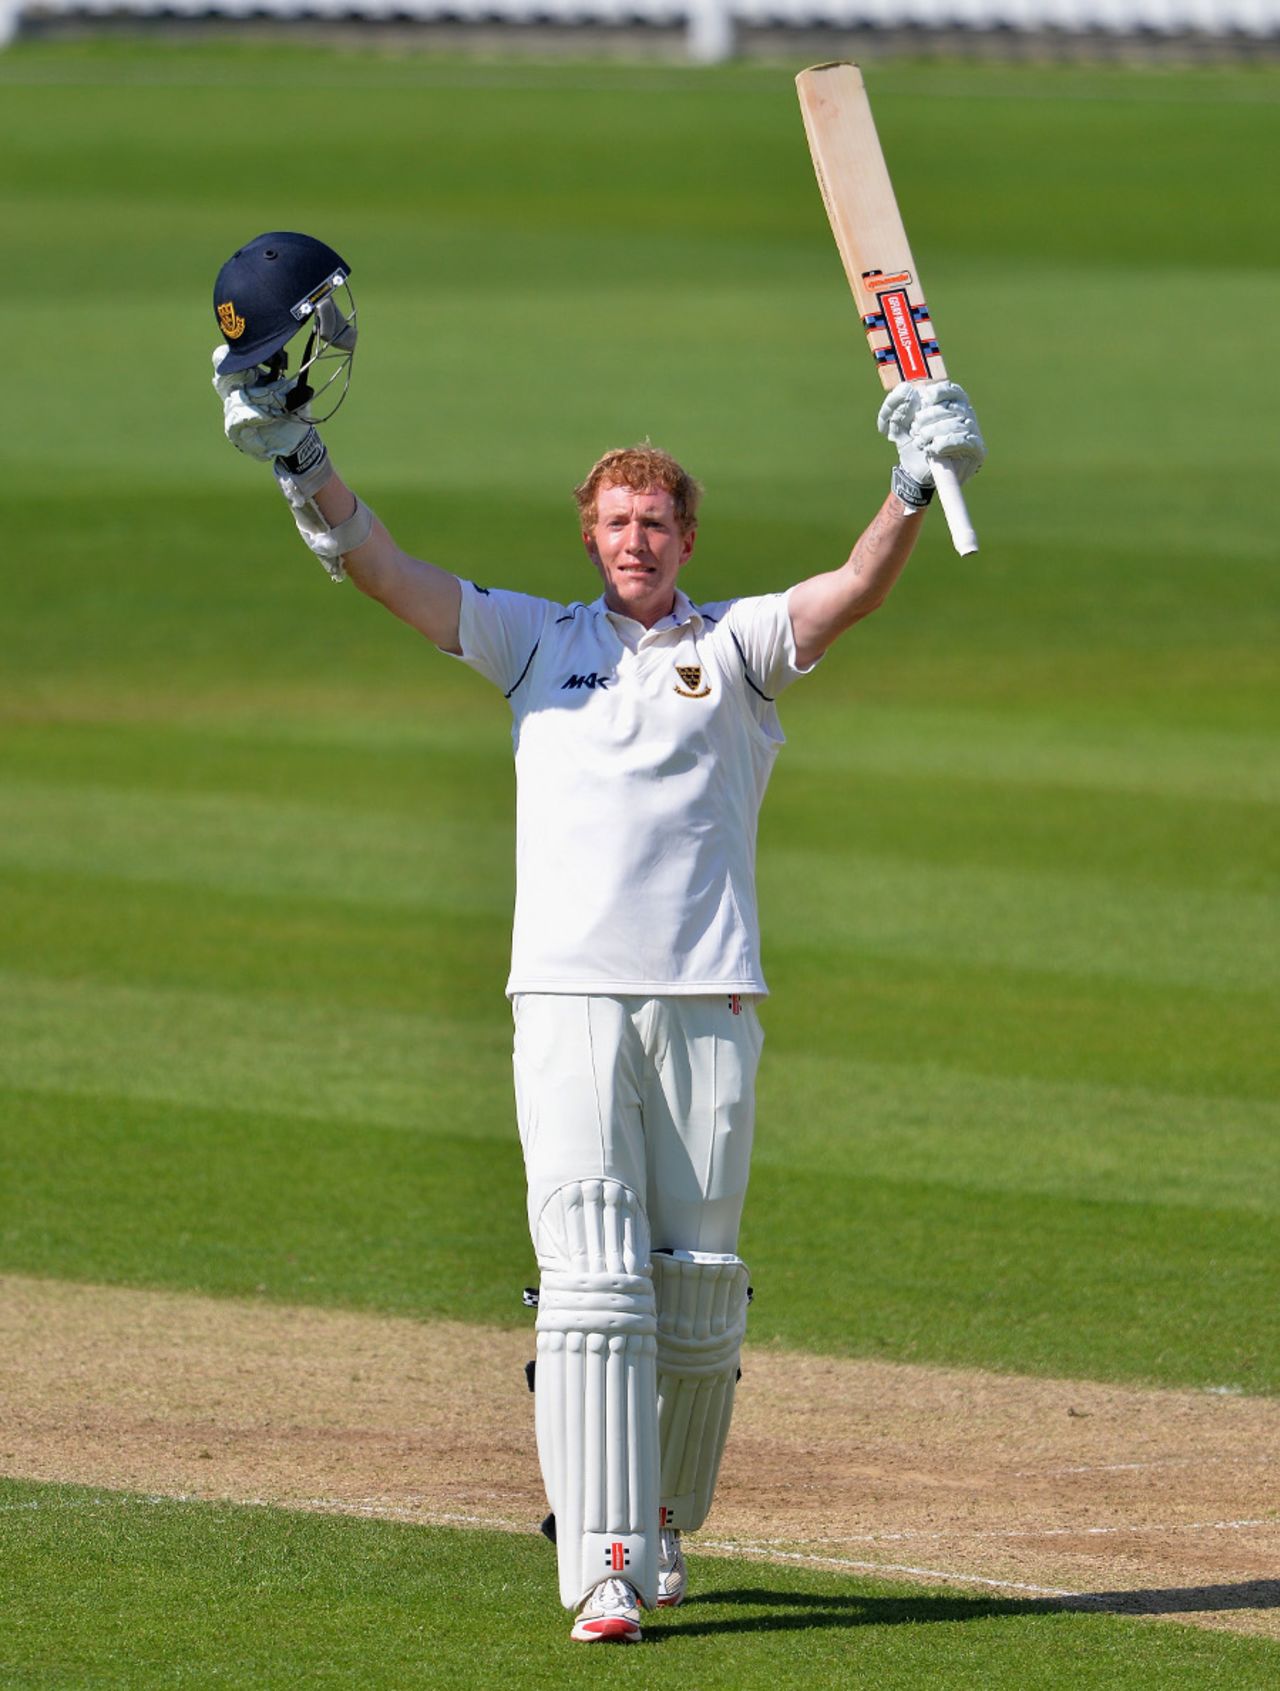 Luke Wells reached his maiden double hundred, Surrey v Sussex, County Championship, Division One, The Oval, 3rd day, April 26, 2013